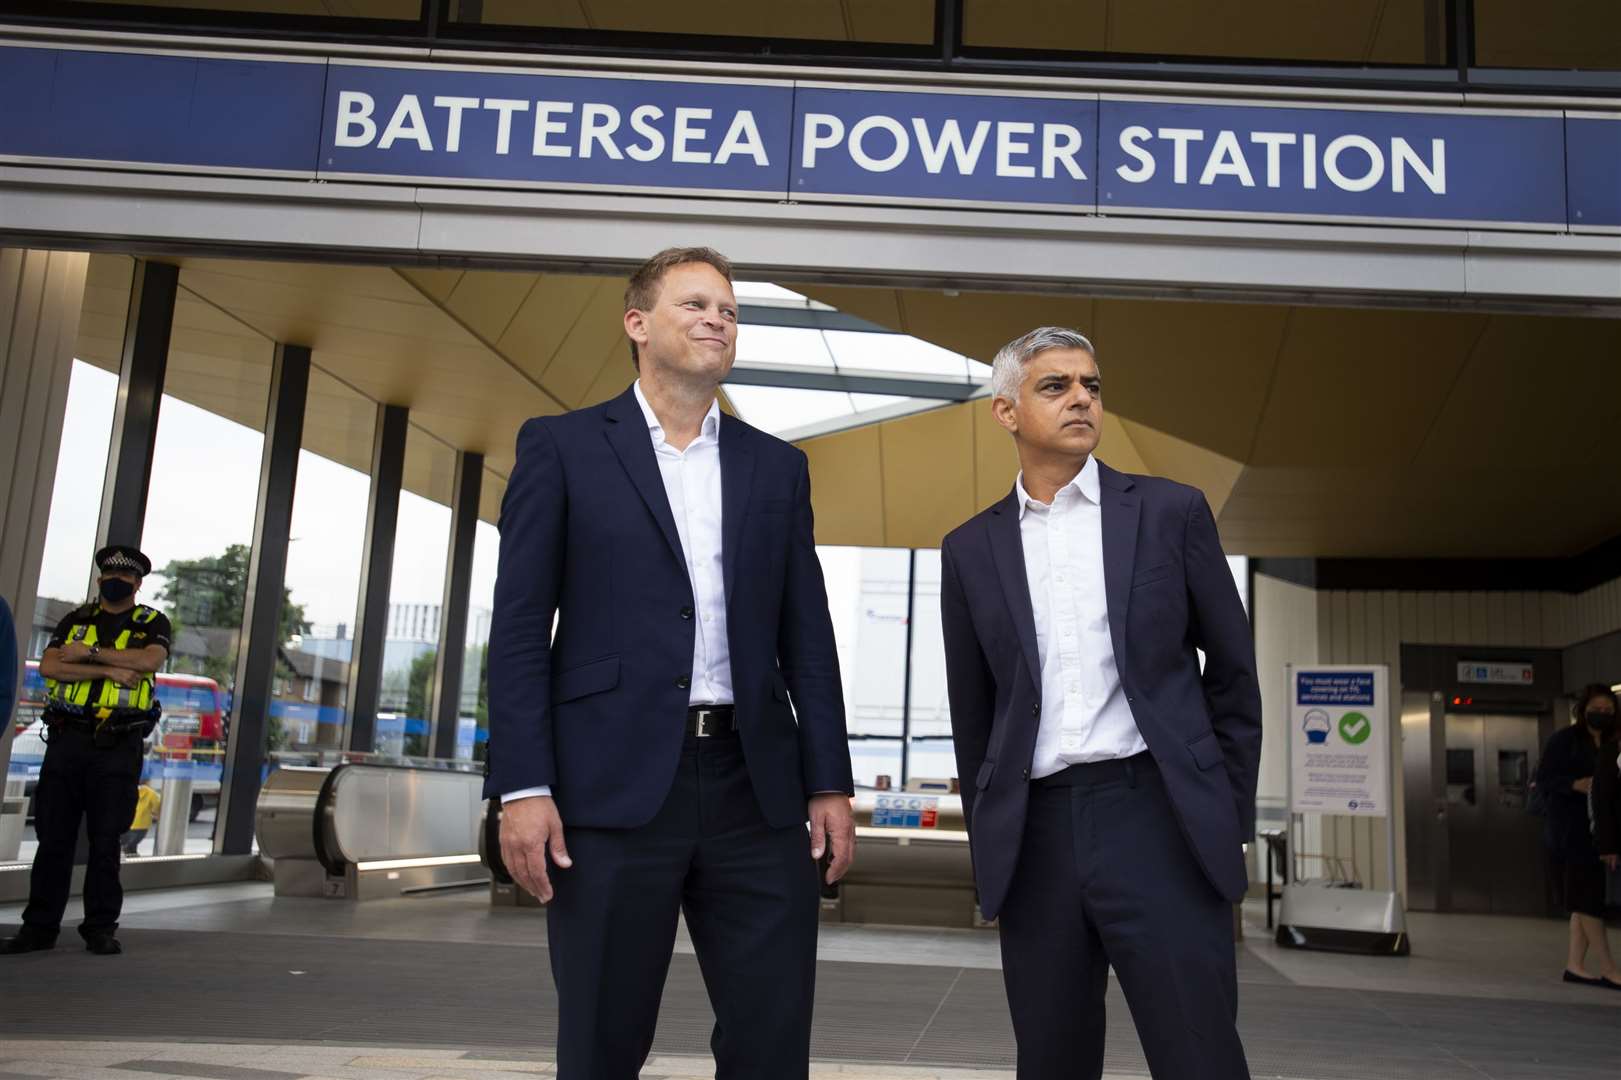 Battersea Power Station is one of two new Tube stations (David Mirzeoff/PA)